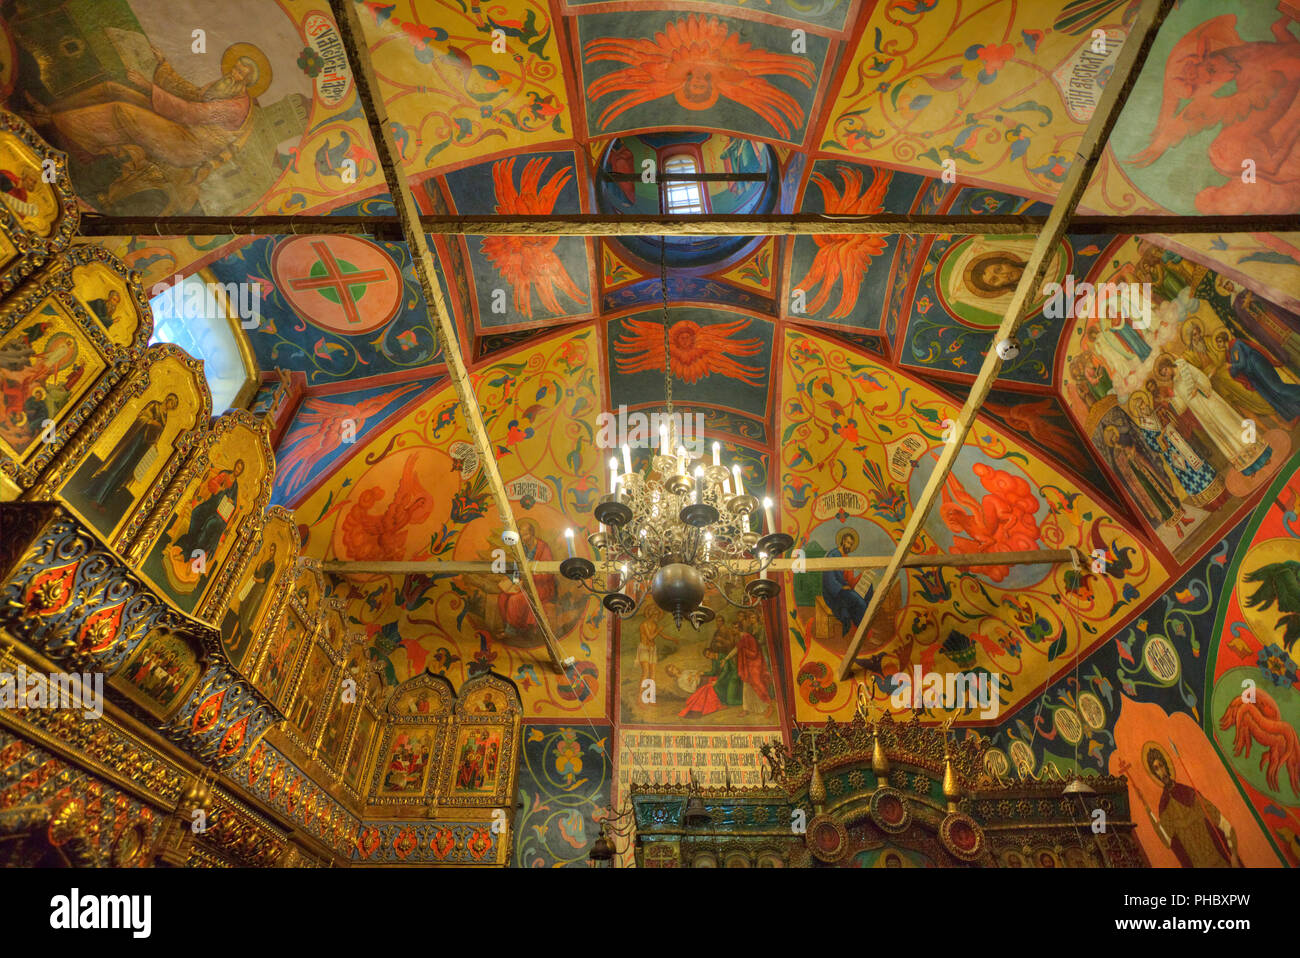 Ceiling frescoes, St. Basil's Cathedral, Red Square, UNESCO World Heritage Site, Moscow, Russia, Europe Stock Photo